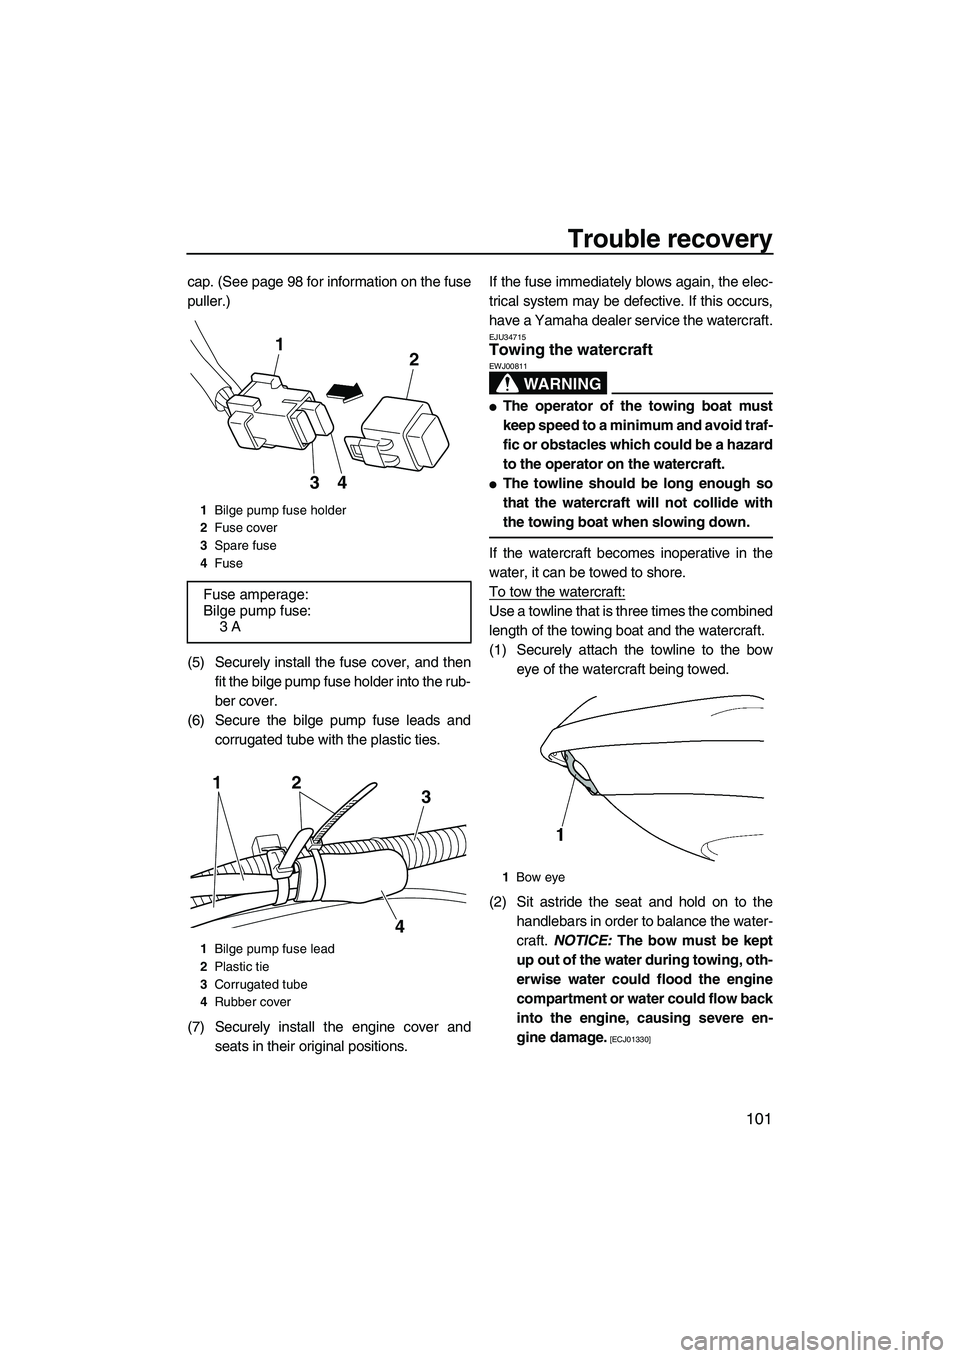 YAMAHA SVHO 2011  Owners Manual Trouble recovery
101
cap. (See page 98 for information on the fuse
puller.)
(5) Securely install the fuse cover, and then
fit the bilge pump fuse holder into the rub-
ber cover.
(6) Secure the bilge p